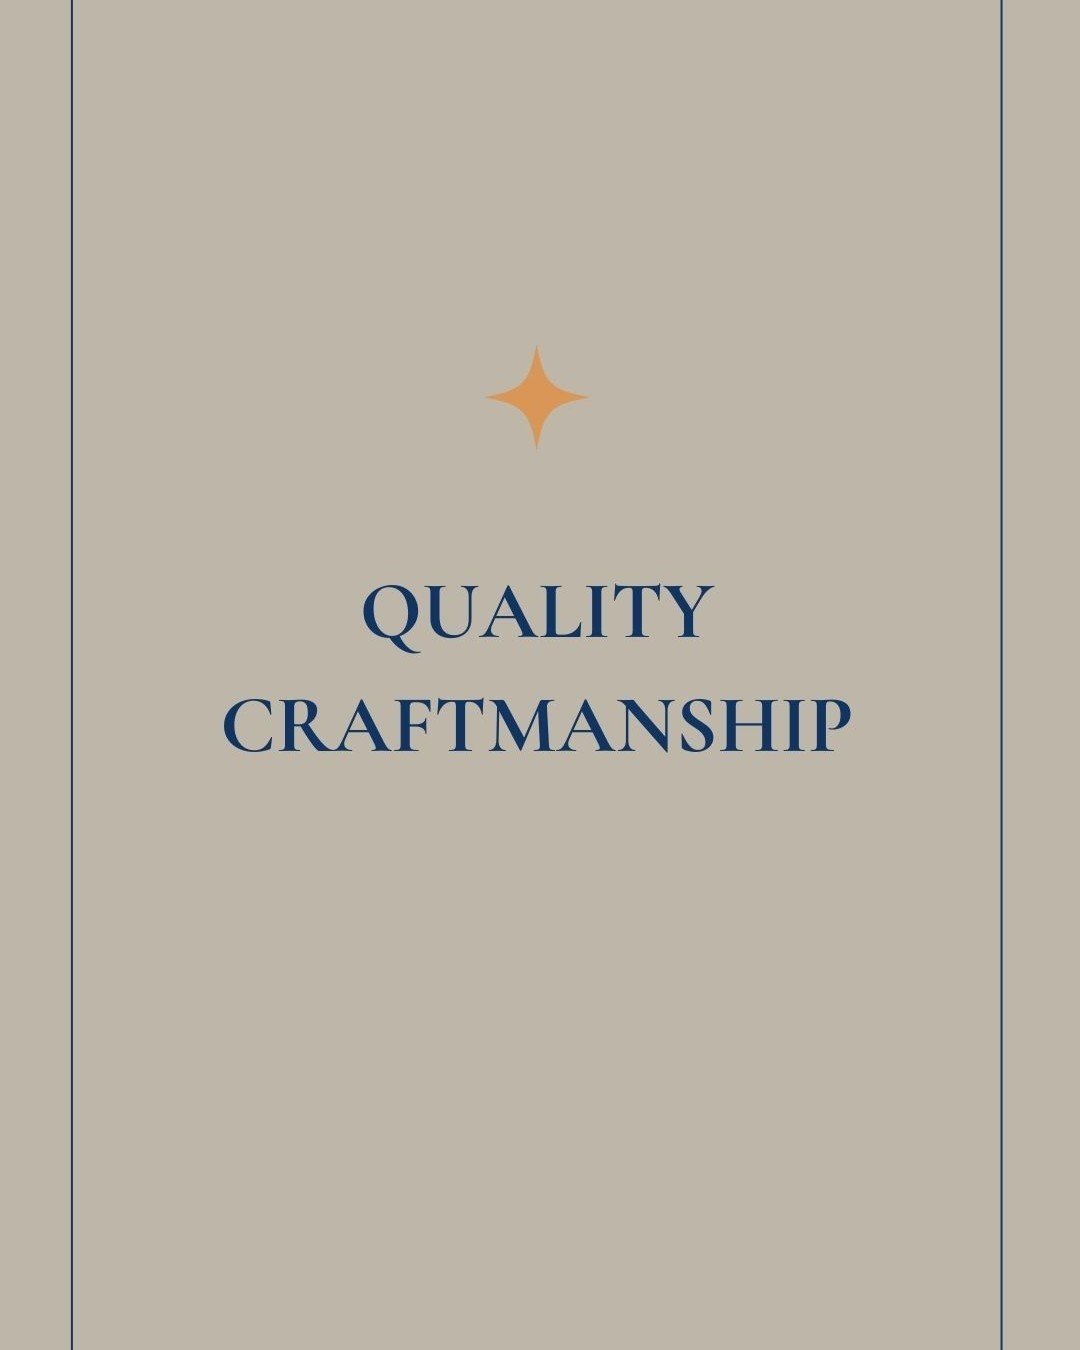 Quality Craftmaship is one of our core values at UCS - We infuse a deep passion, genuine care and a meticulous attention to detail into every project we build.

#ucs_nyc #contractor #construction #builder #customcontractor #customconstruction #custom